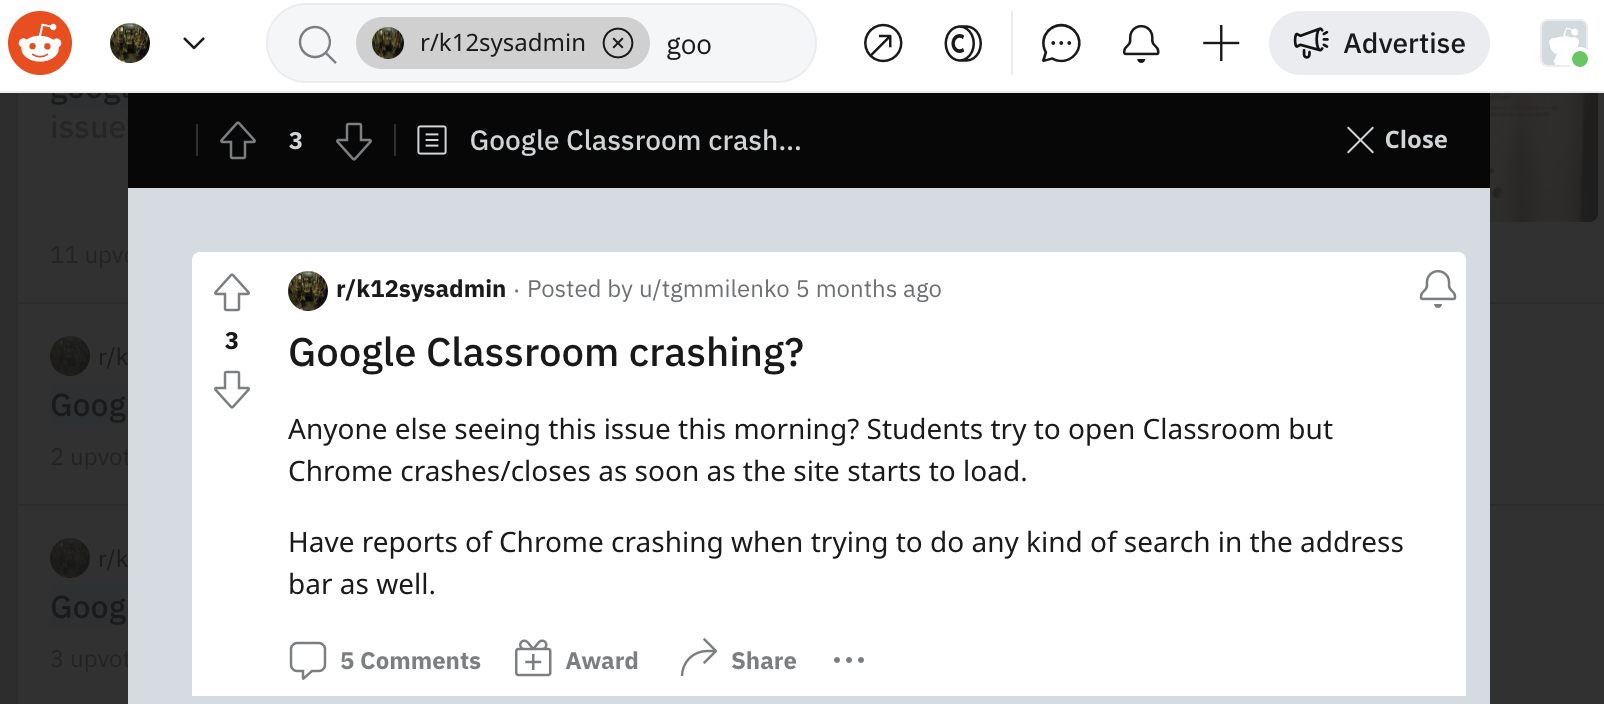 Reddit users report issues with Google Classroom